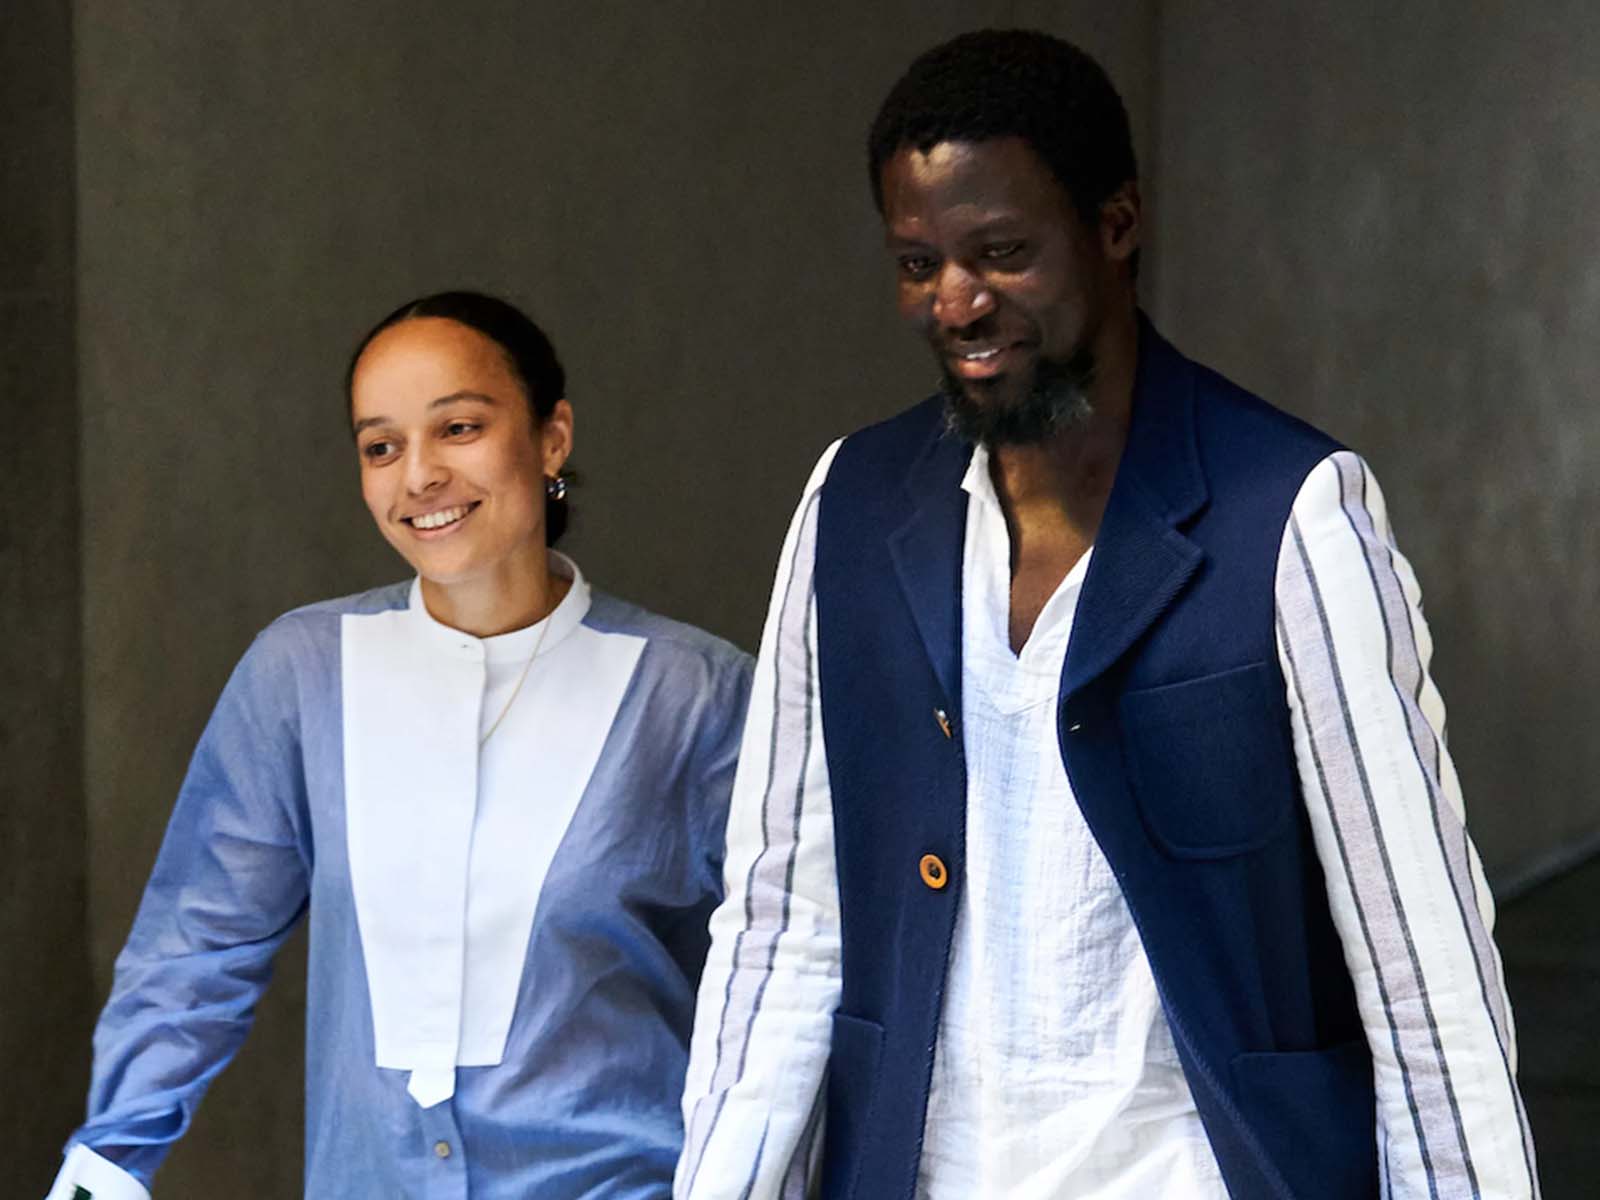 Wales Bonner at Pitti Uomo: masterful fusion of African and European culture